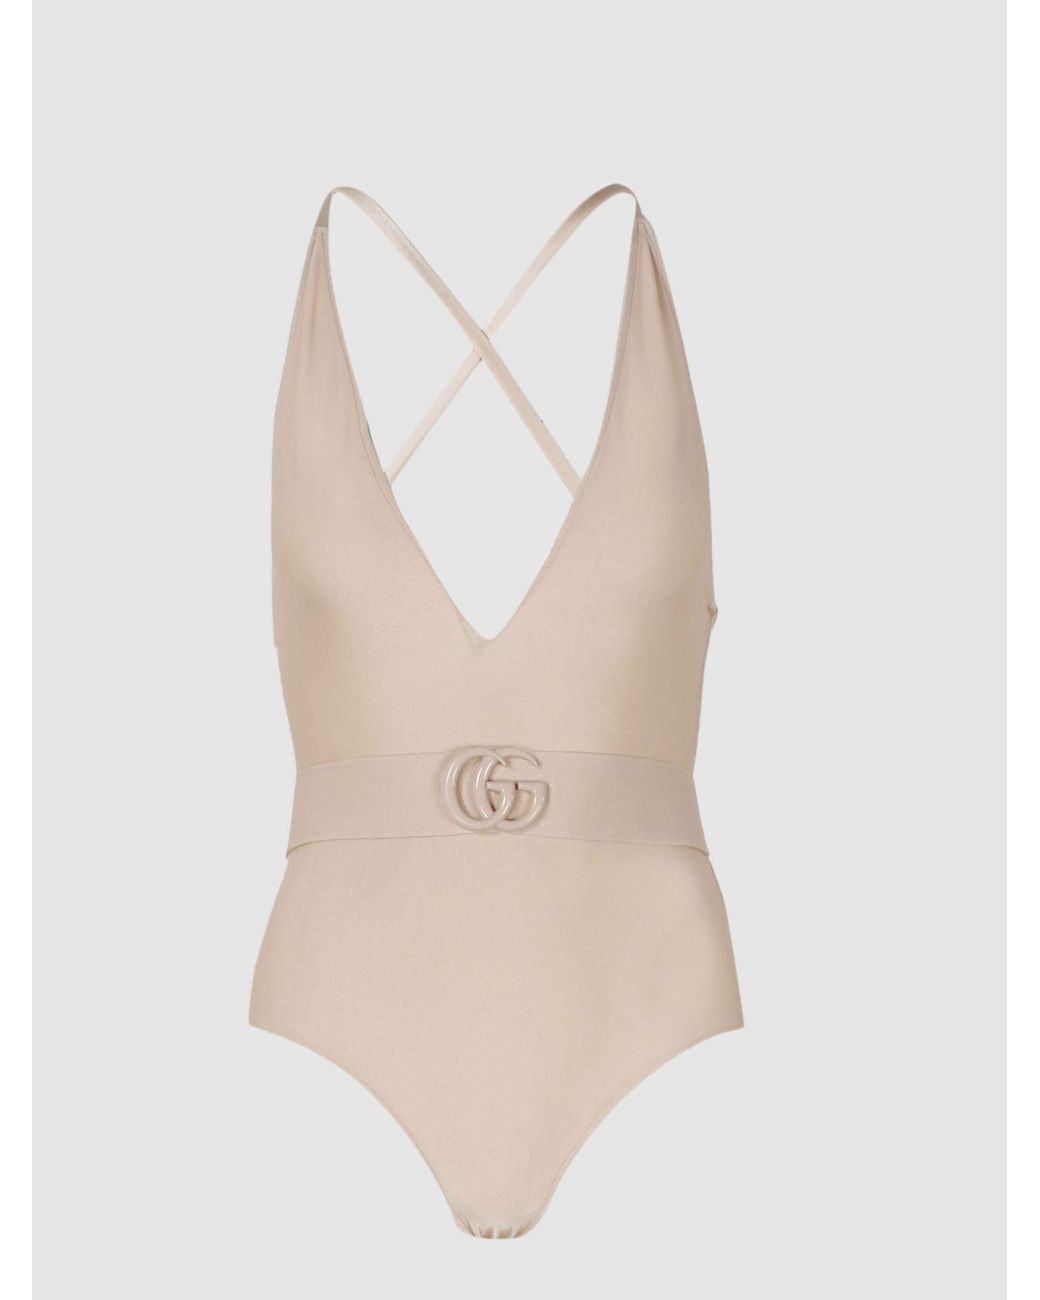 GG cutout one-shoulder swimsuit in brown - Gucci